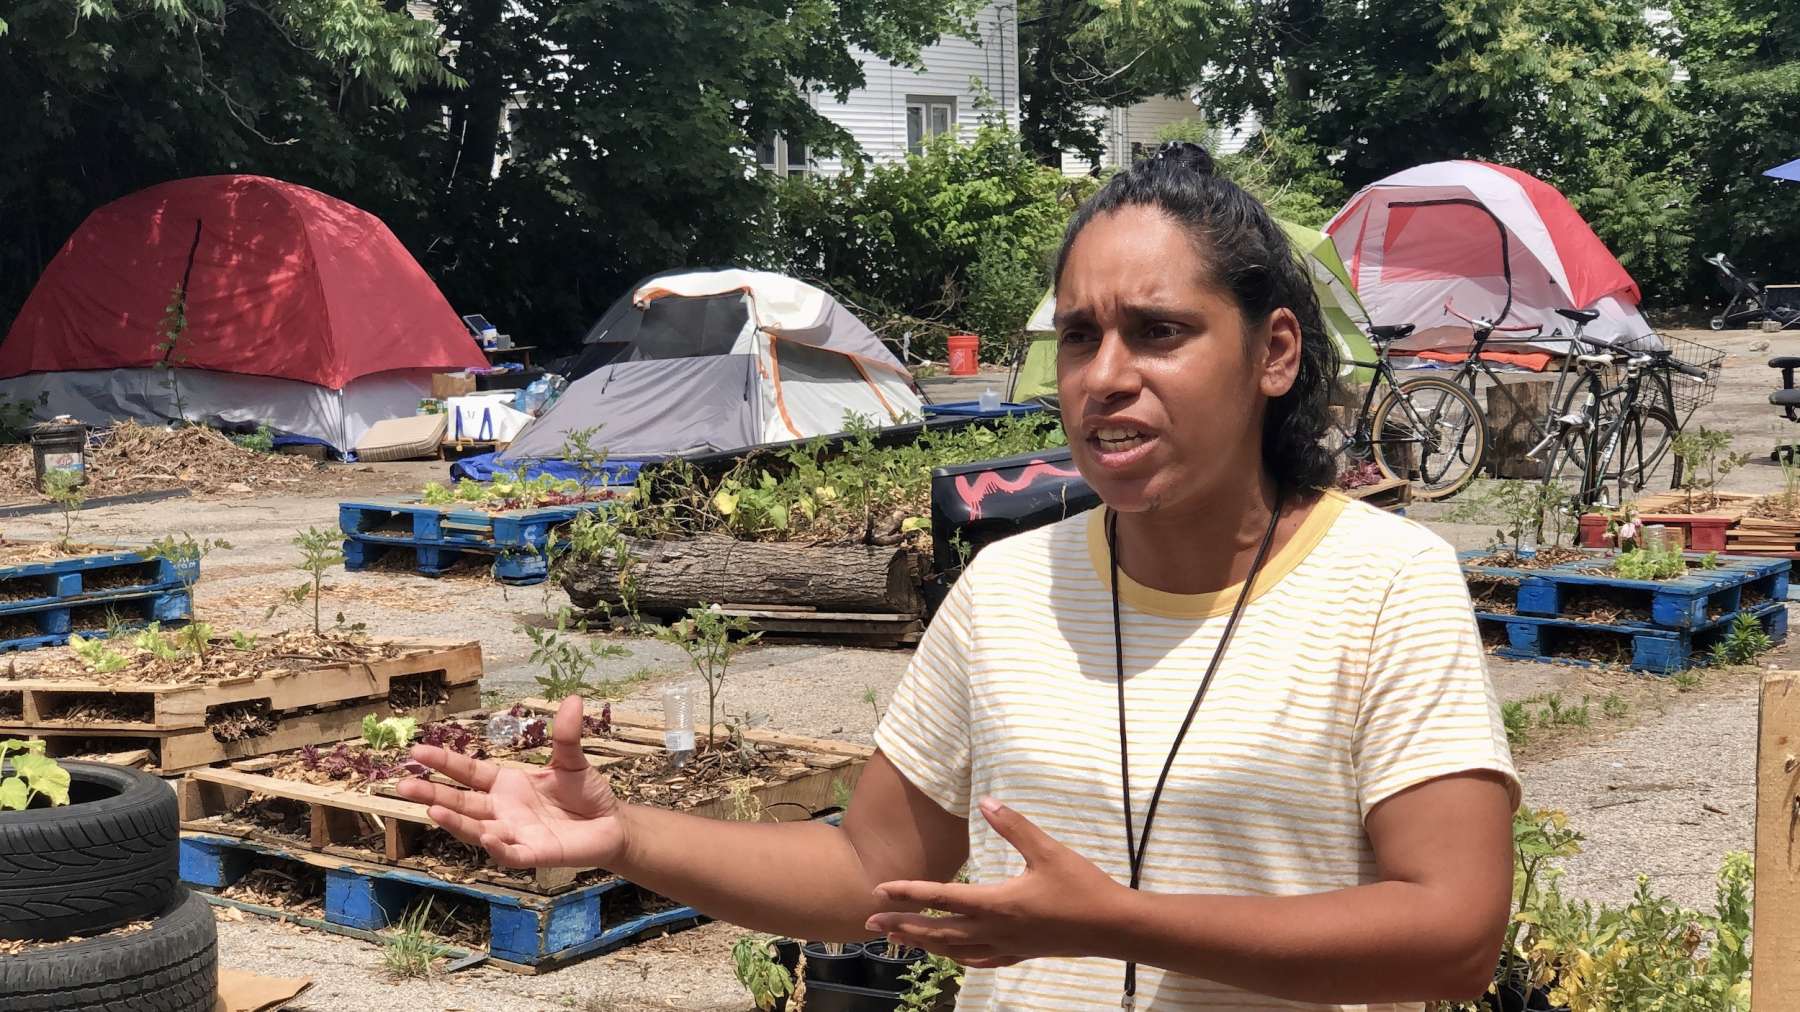 Rhode Island News: Given 48 hours to vacate, unhoused encampment in PVD holds press conference